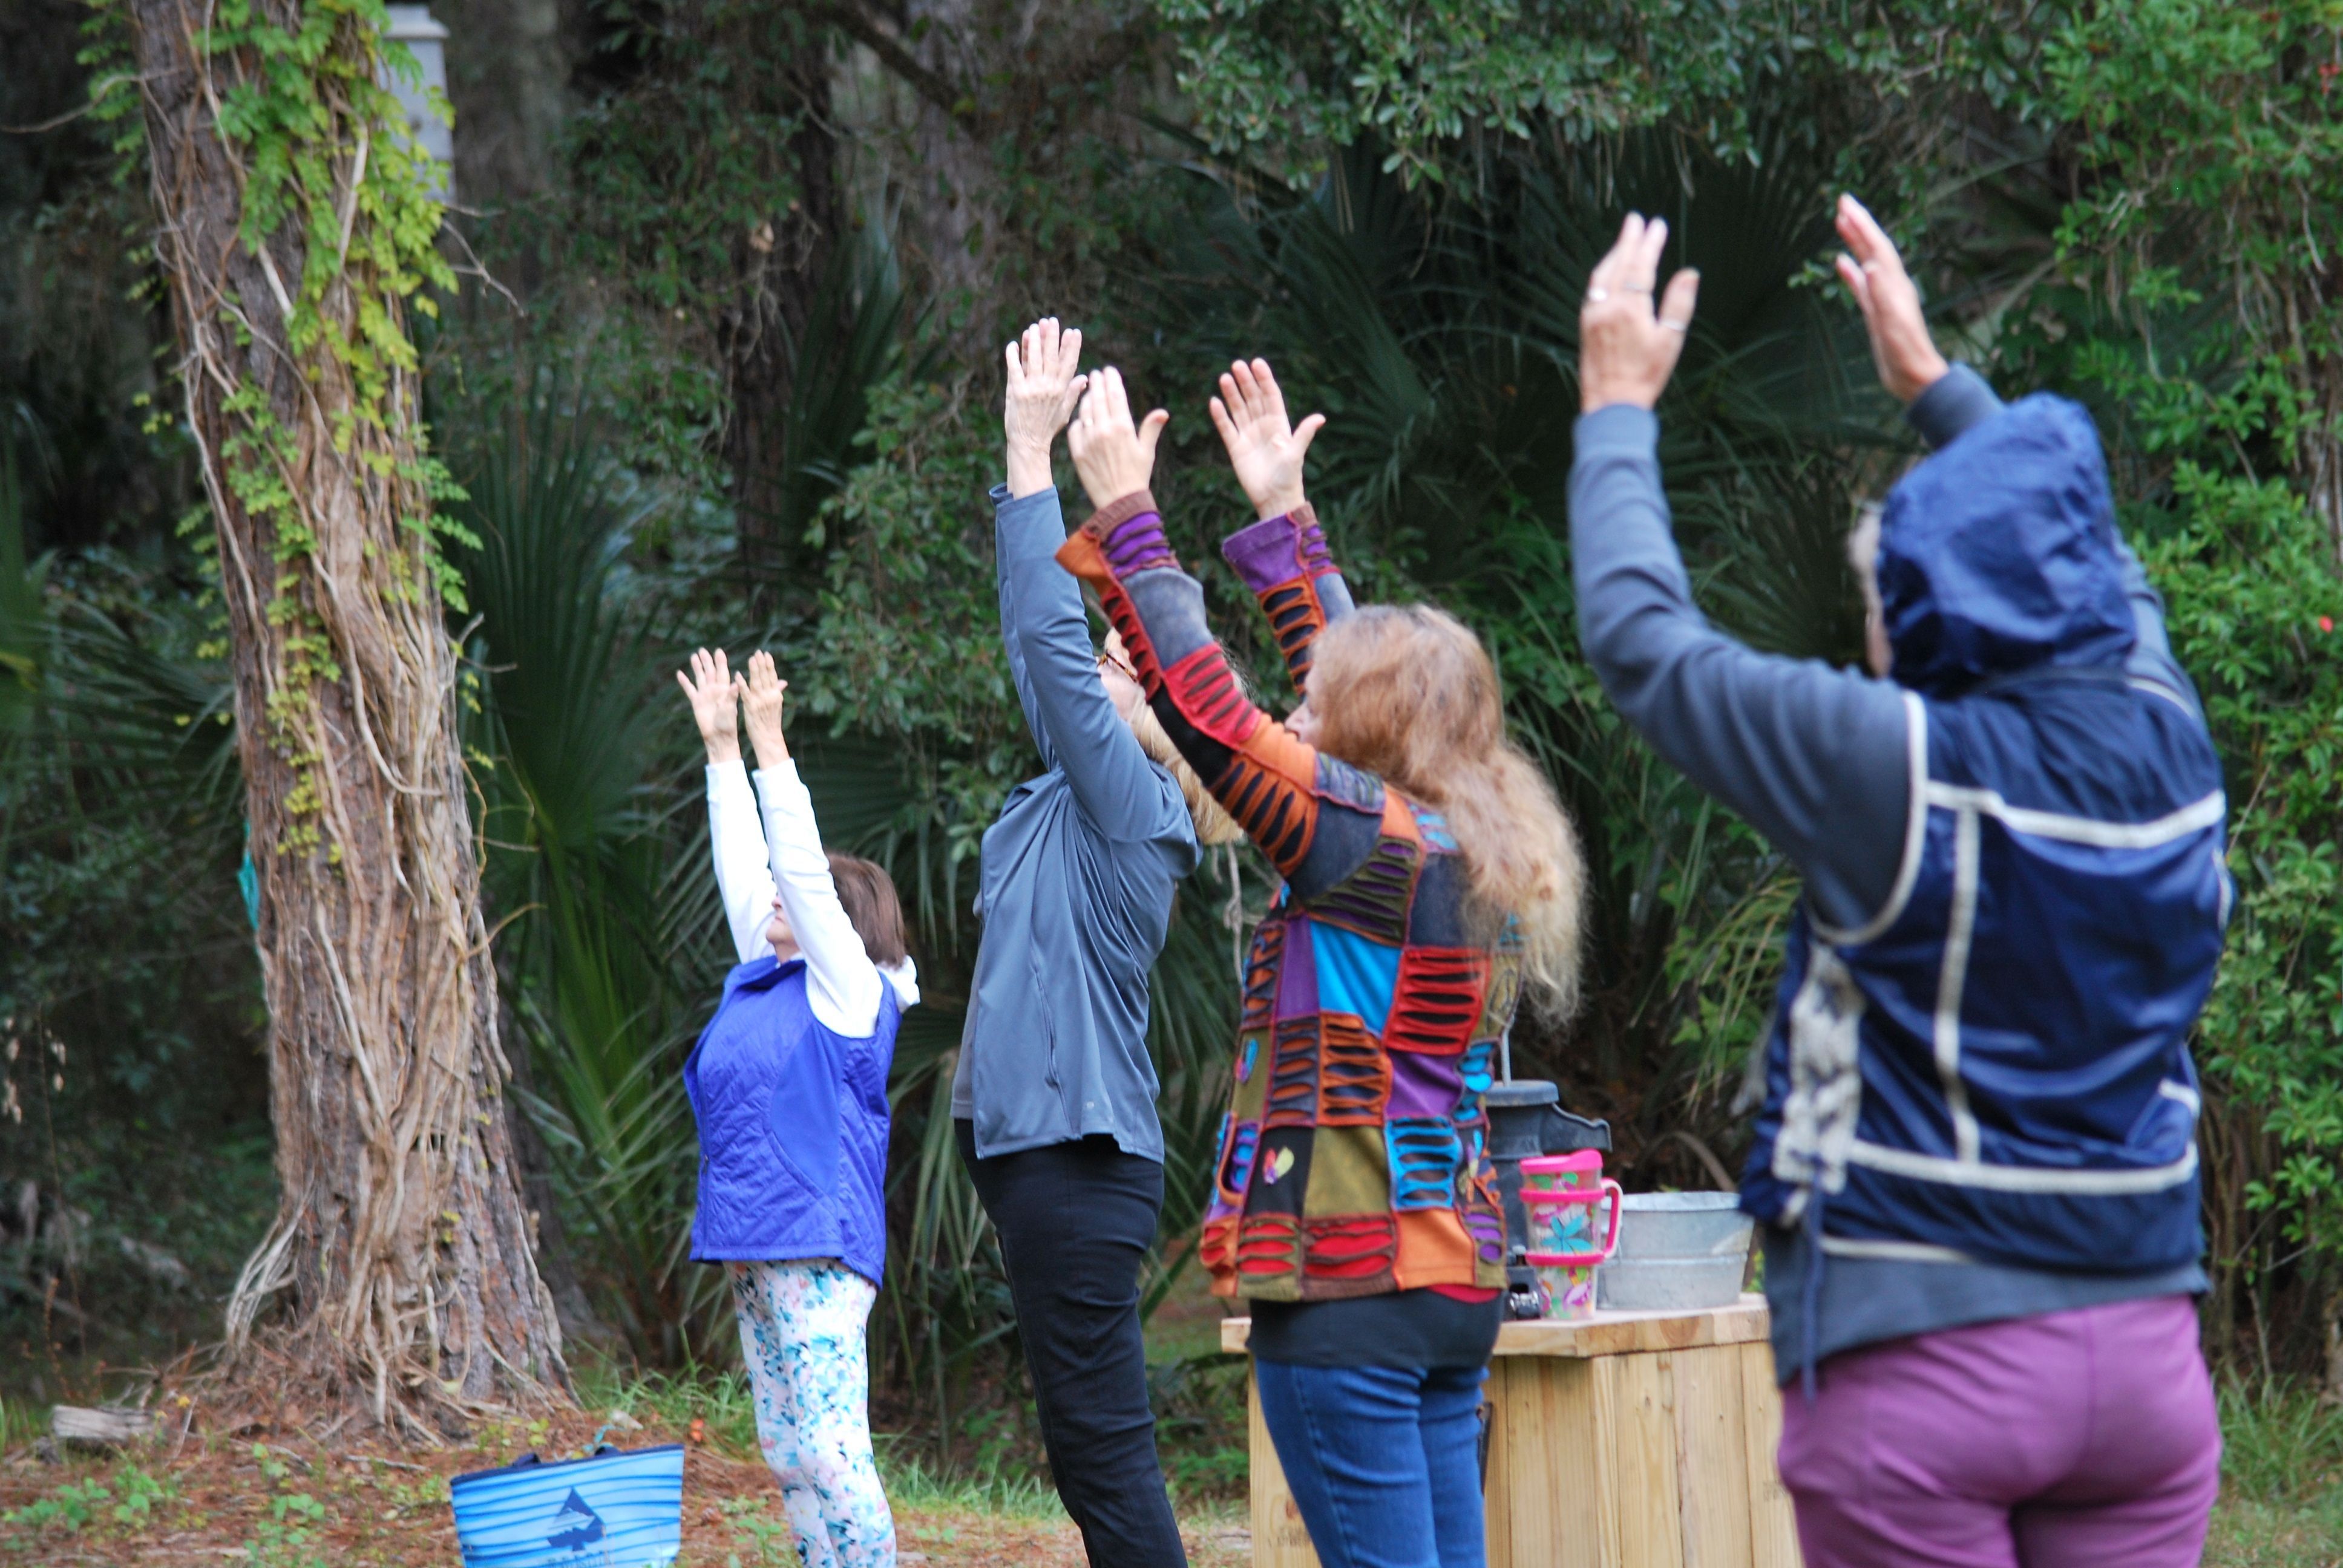 Participants raising their hands in a yoga pose under the pines.